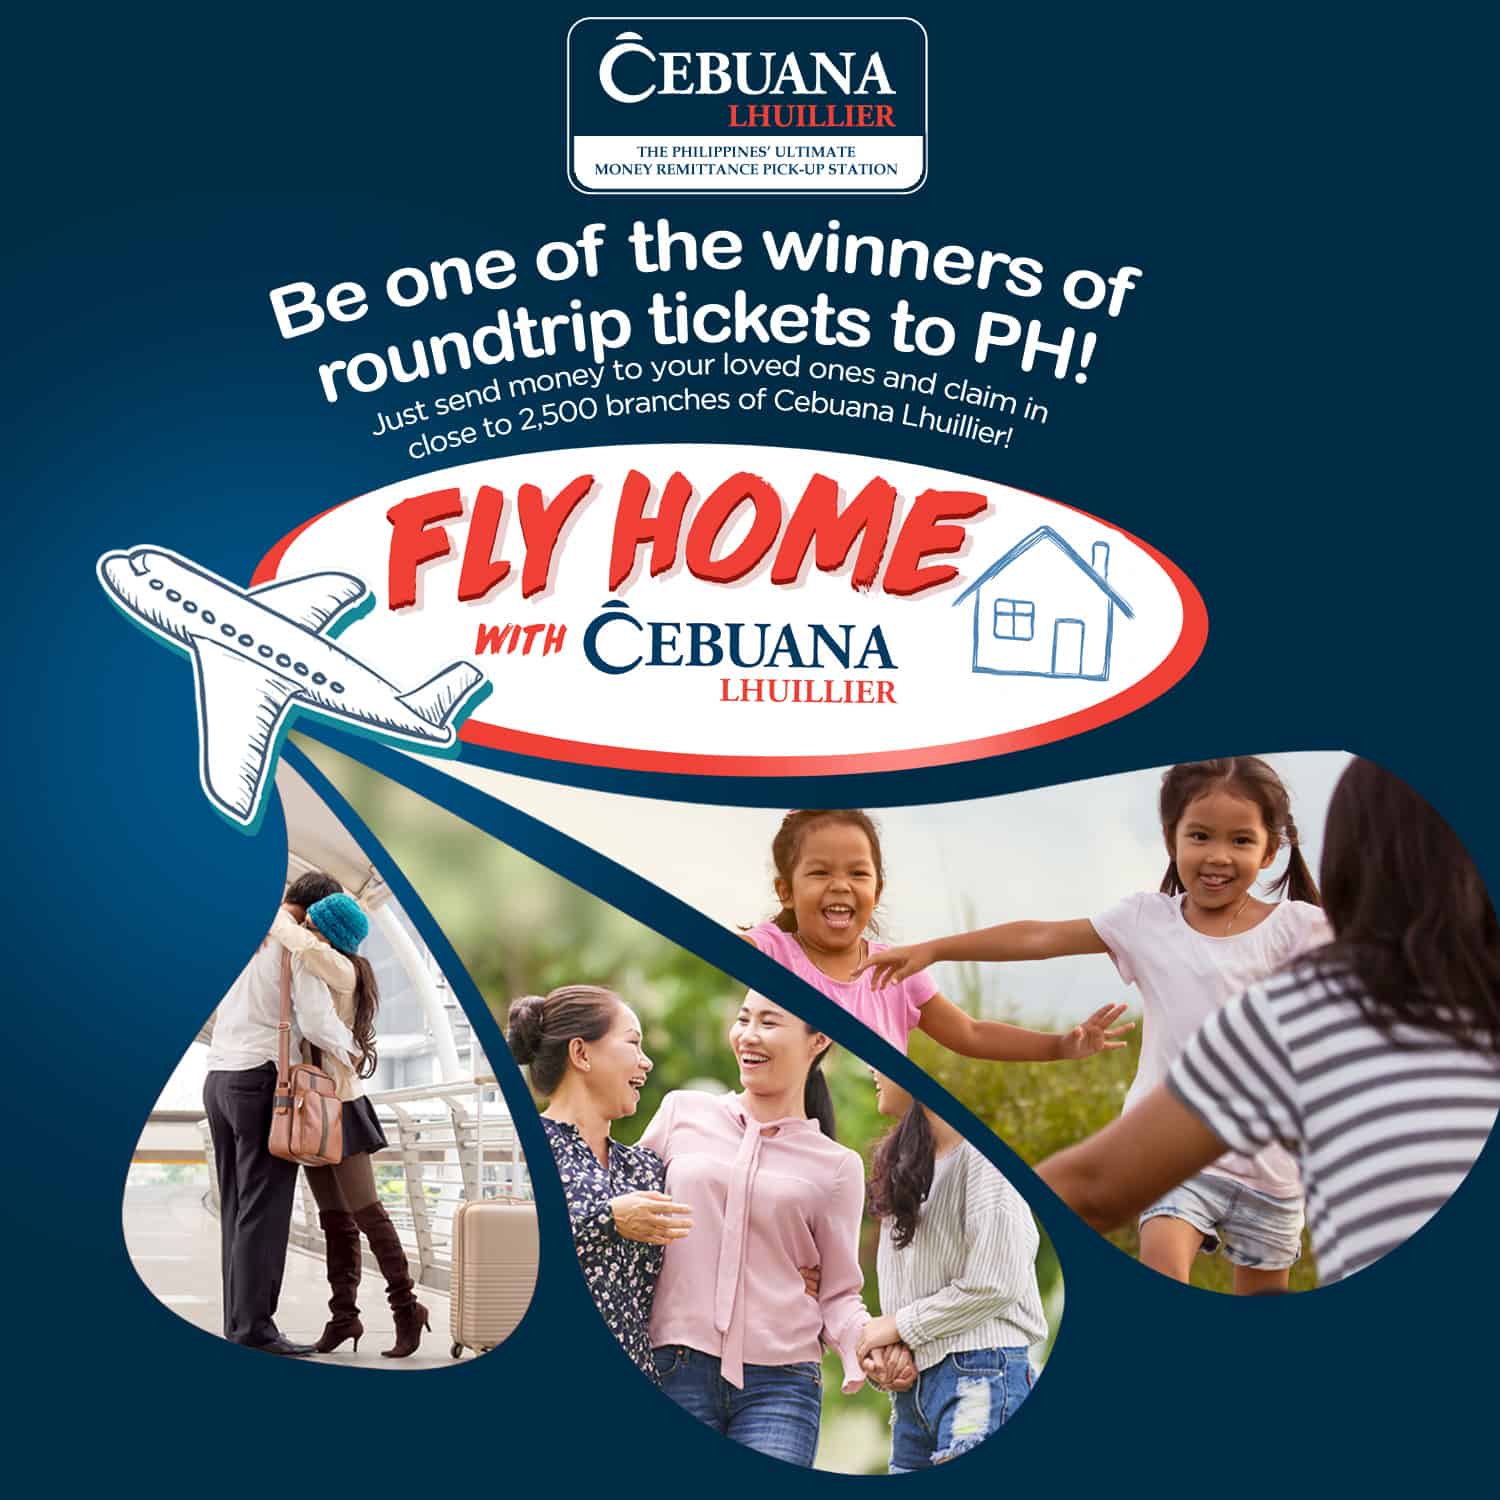 Fly Home with Cebuana Lhuillier!